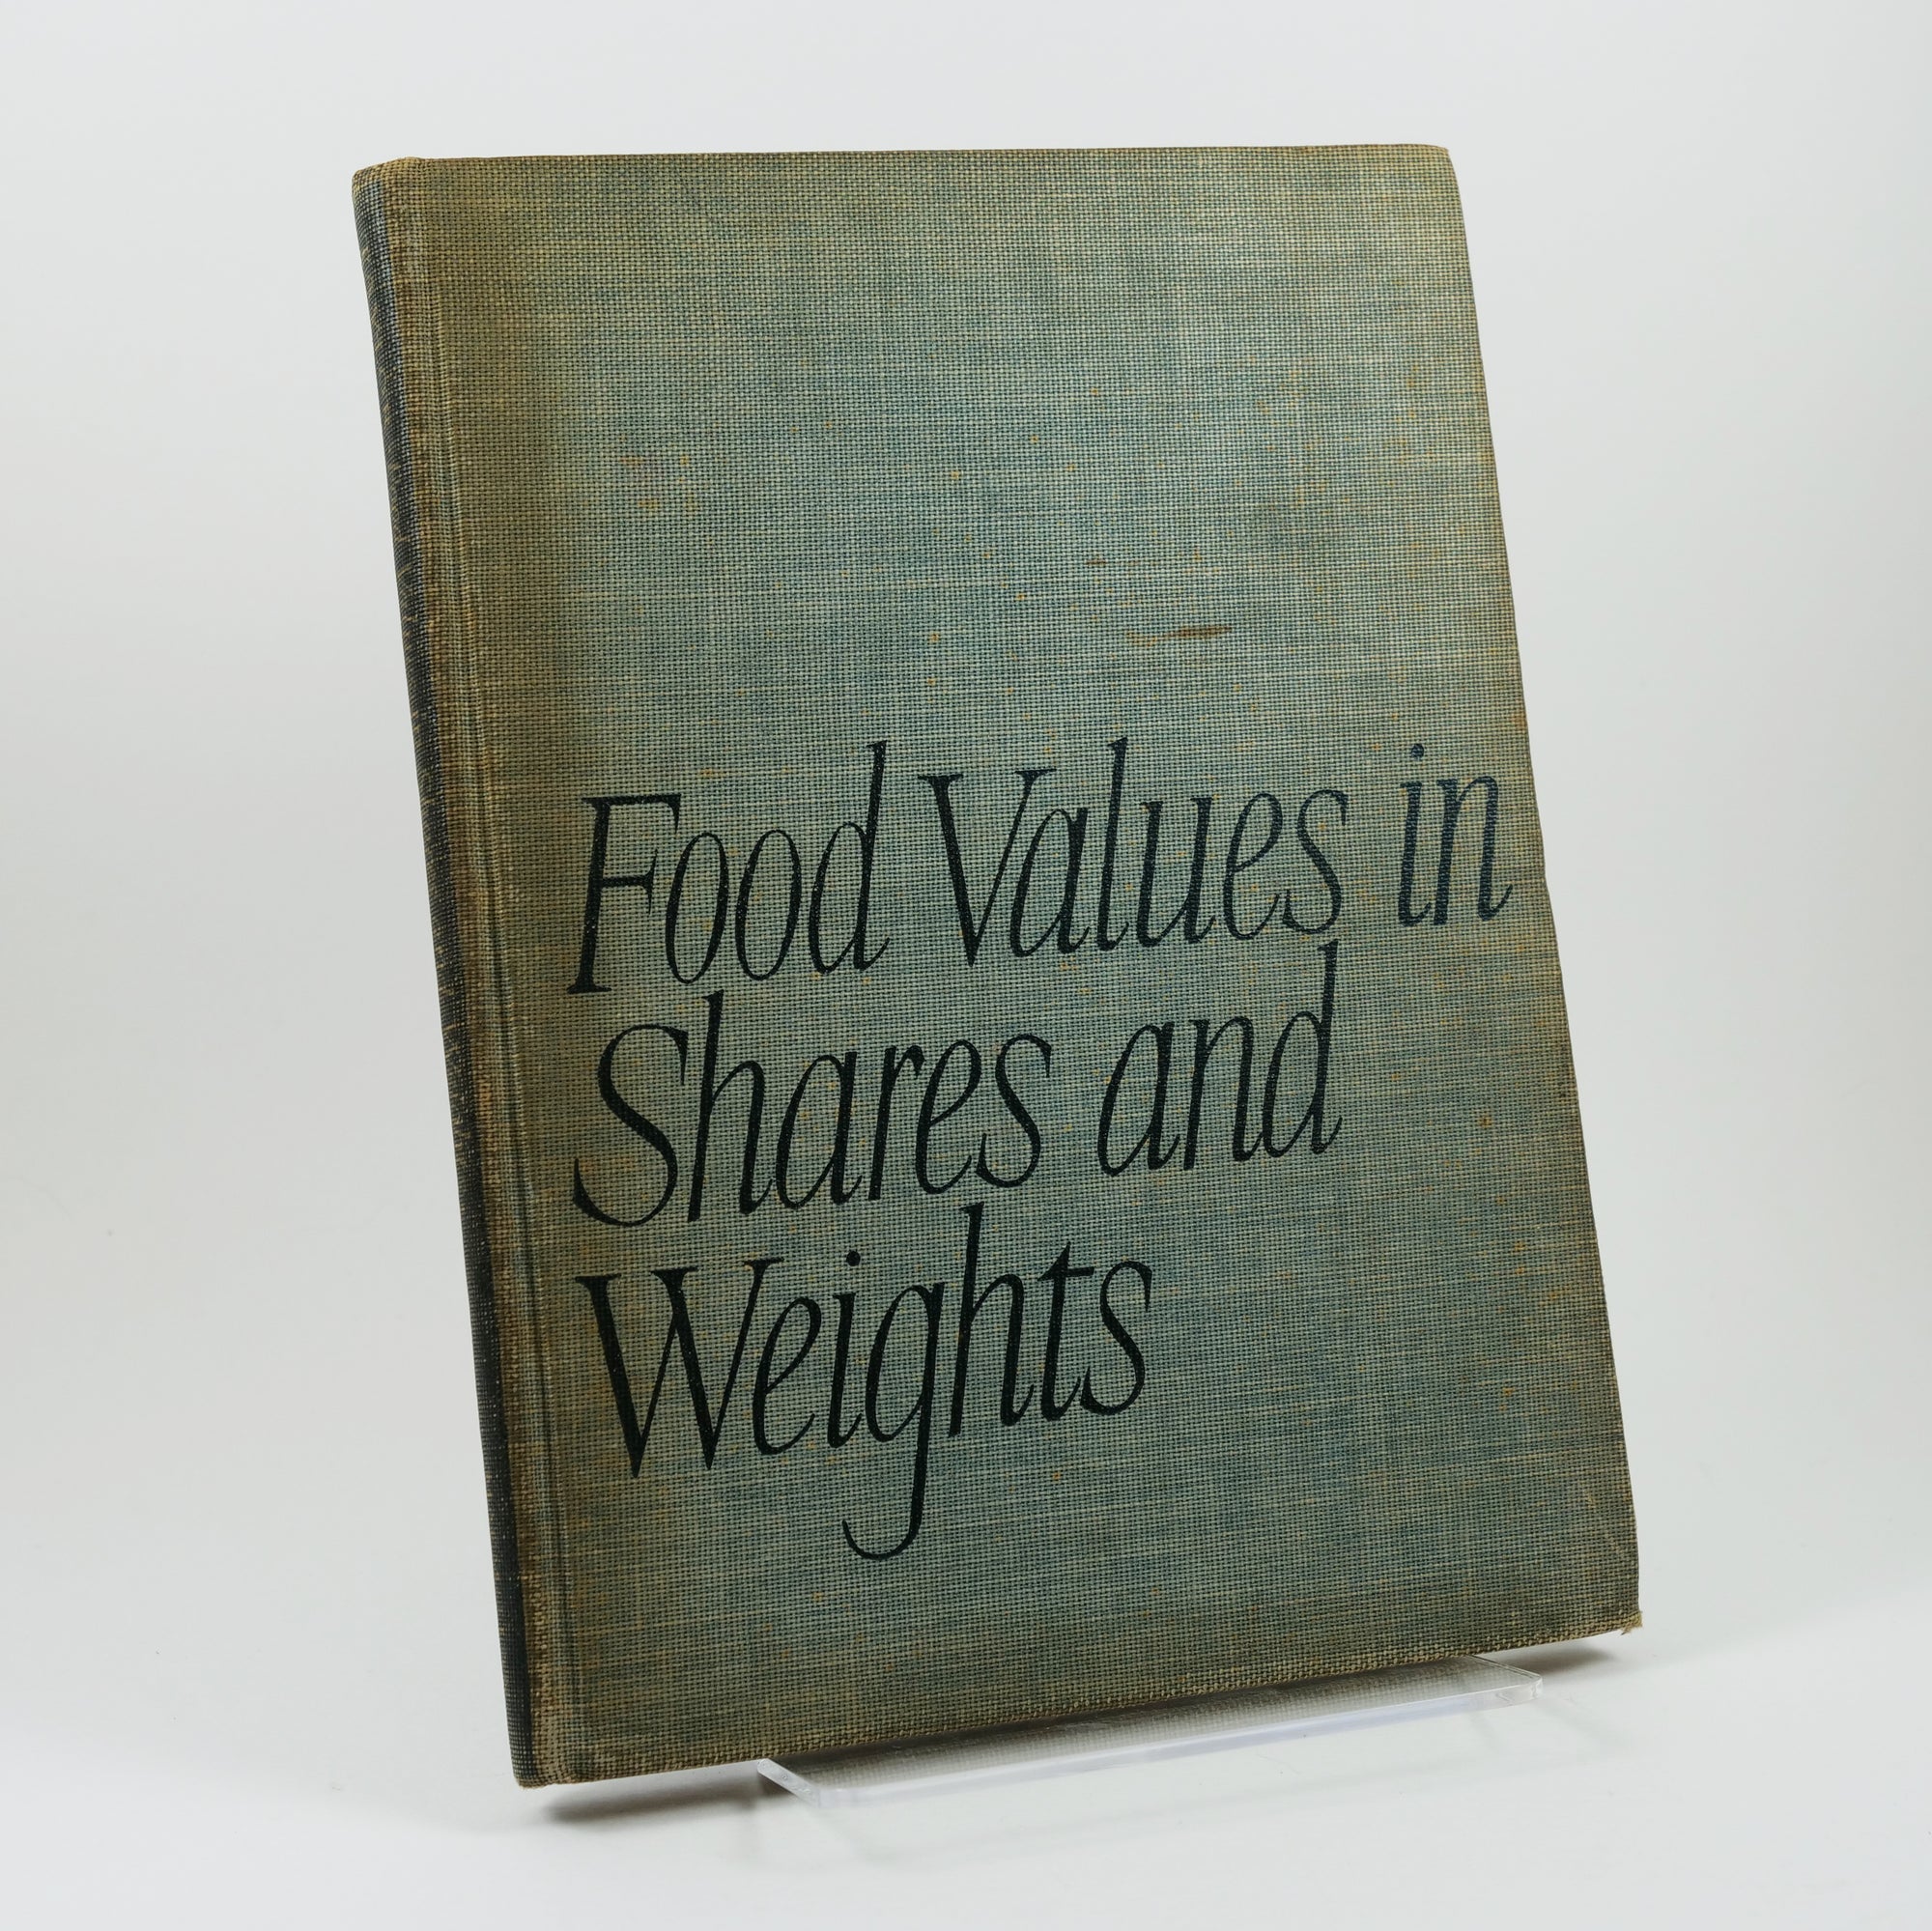 Taylor, Clara Mae | Food Values in Shares and Weights